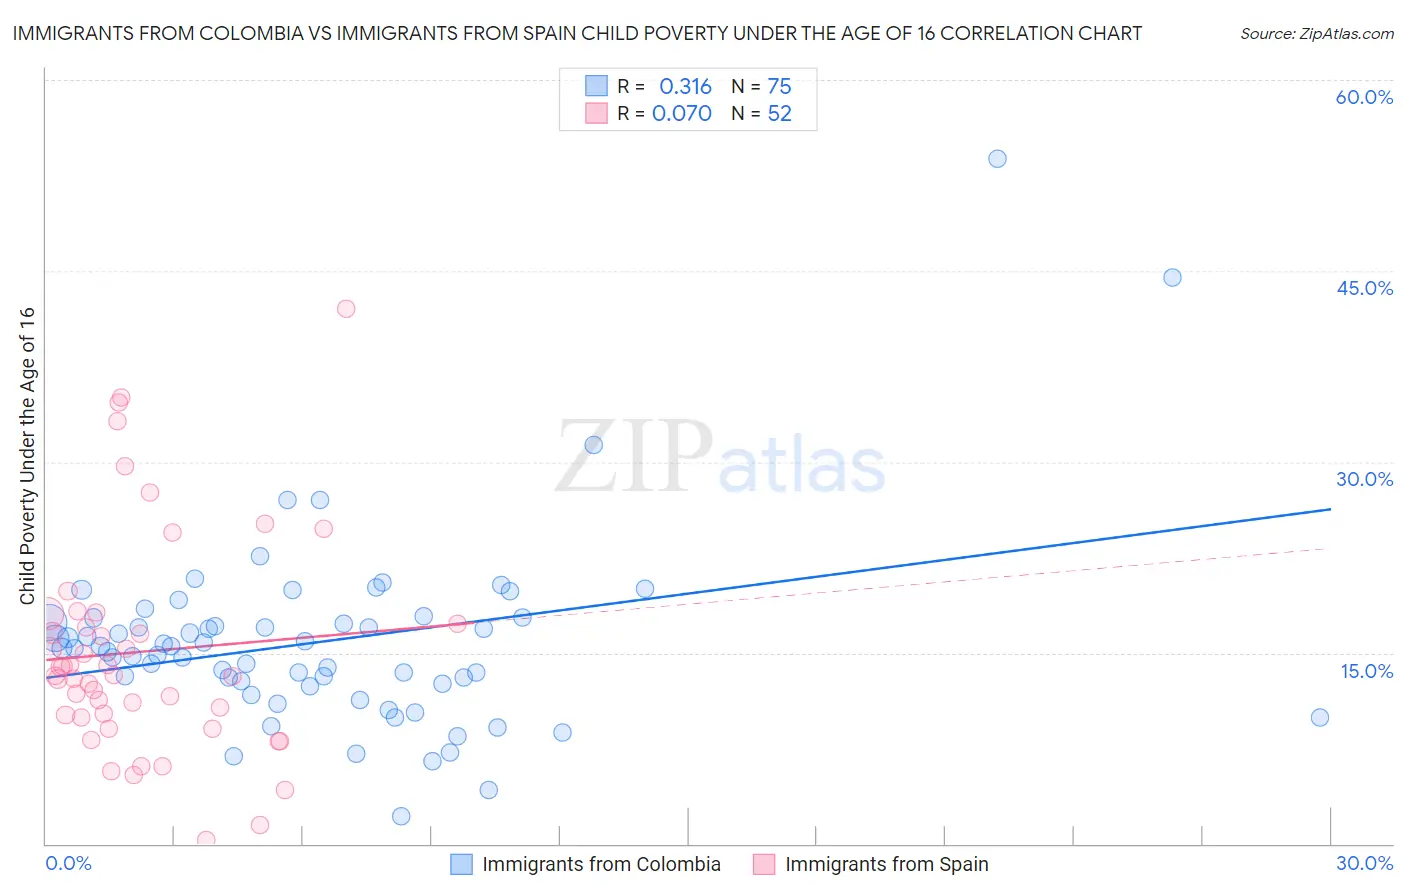 Immigrants from Colombia vs Immigrants from Spain Child Poverty Under the Age of 16